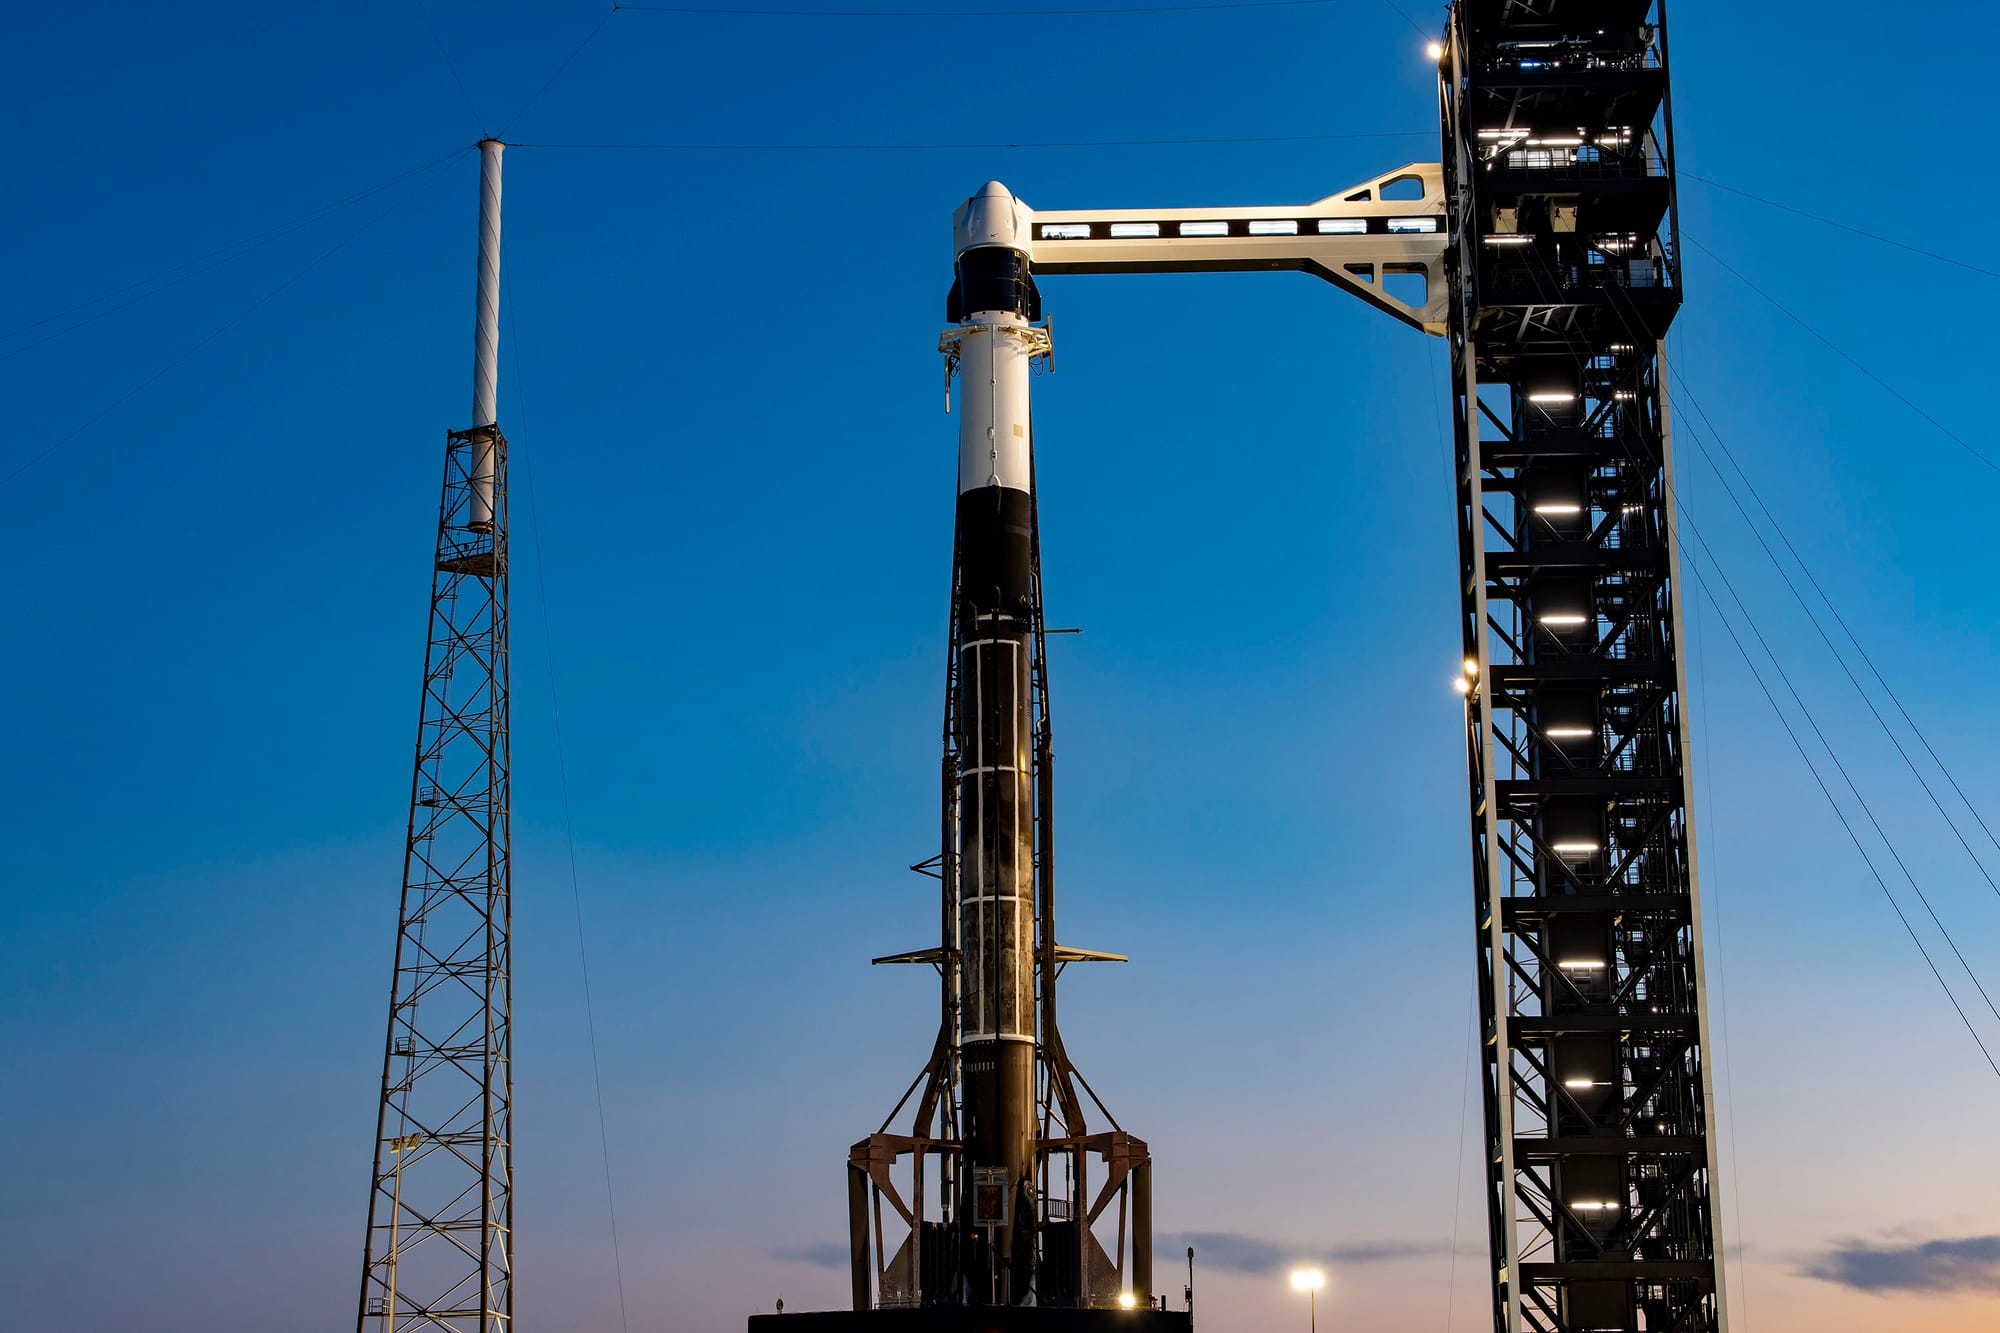 Cargo Dragon V2 C209 atop of Falcon 9 at Space Launch Complex 40 prior to launch. ©SpaceX